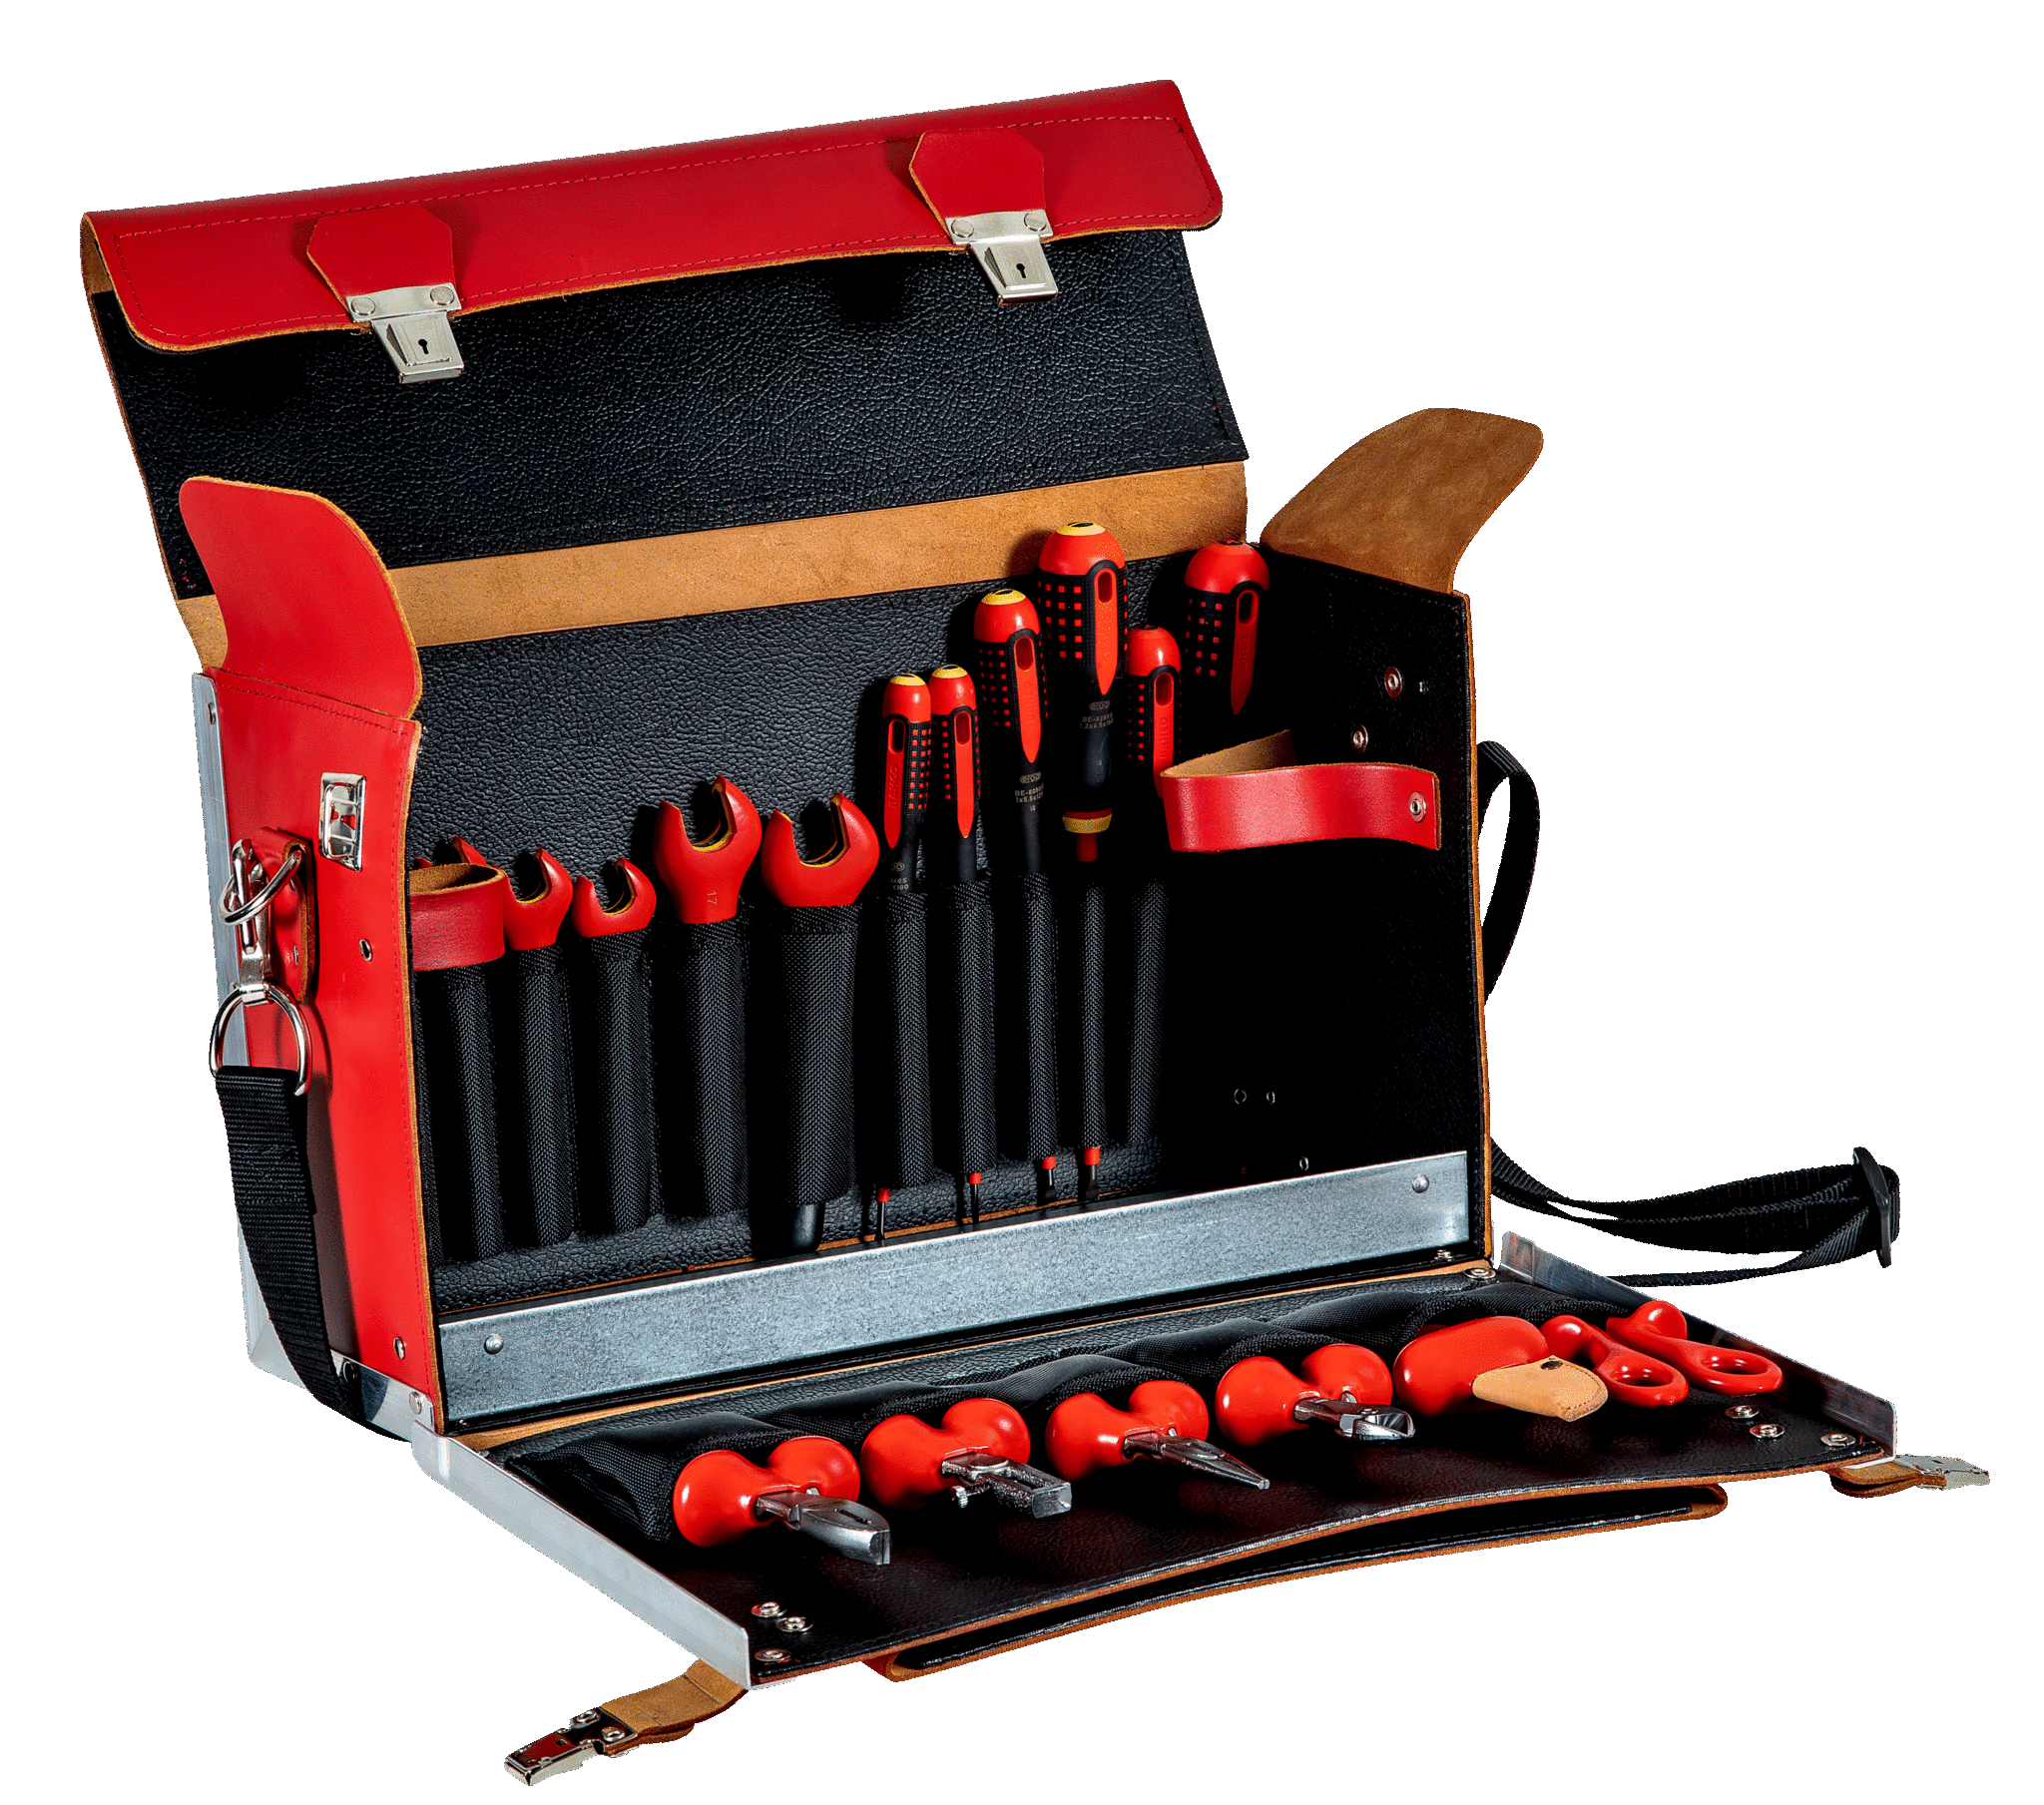 Insulated Toolset within Leather Bag - 19 Pcs | BAHCO | Bahco 